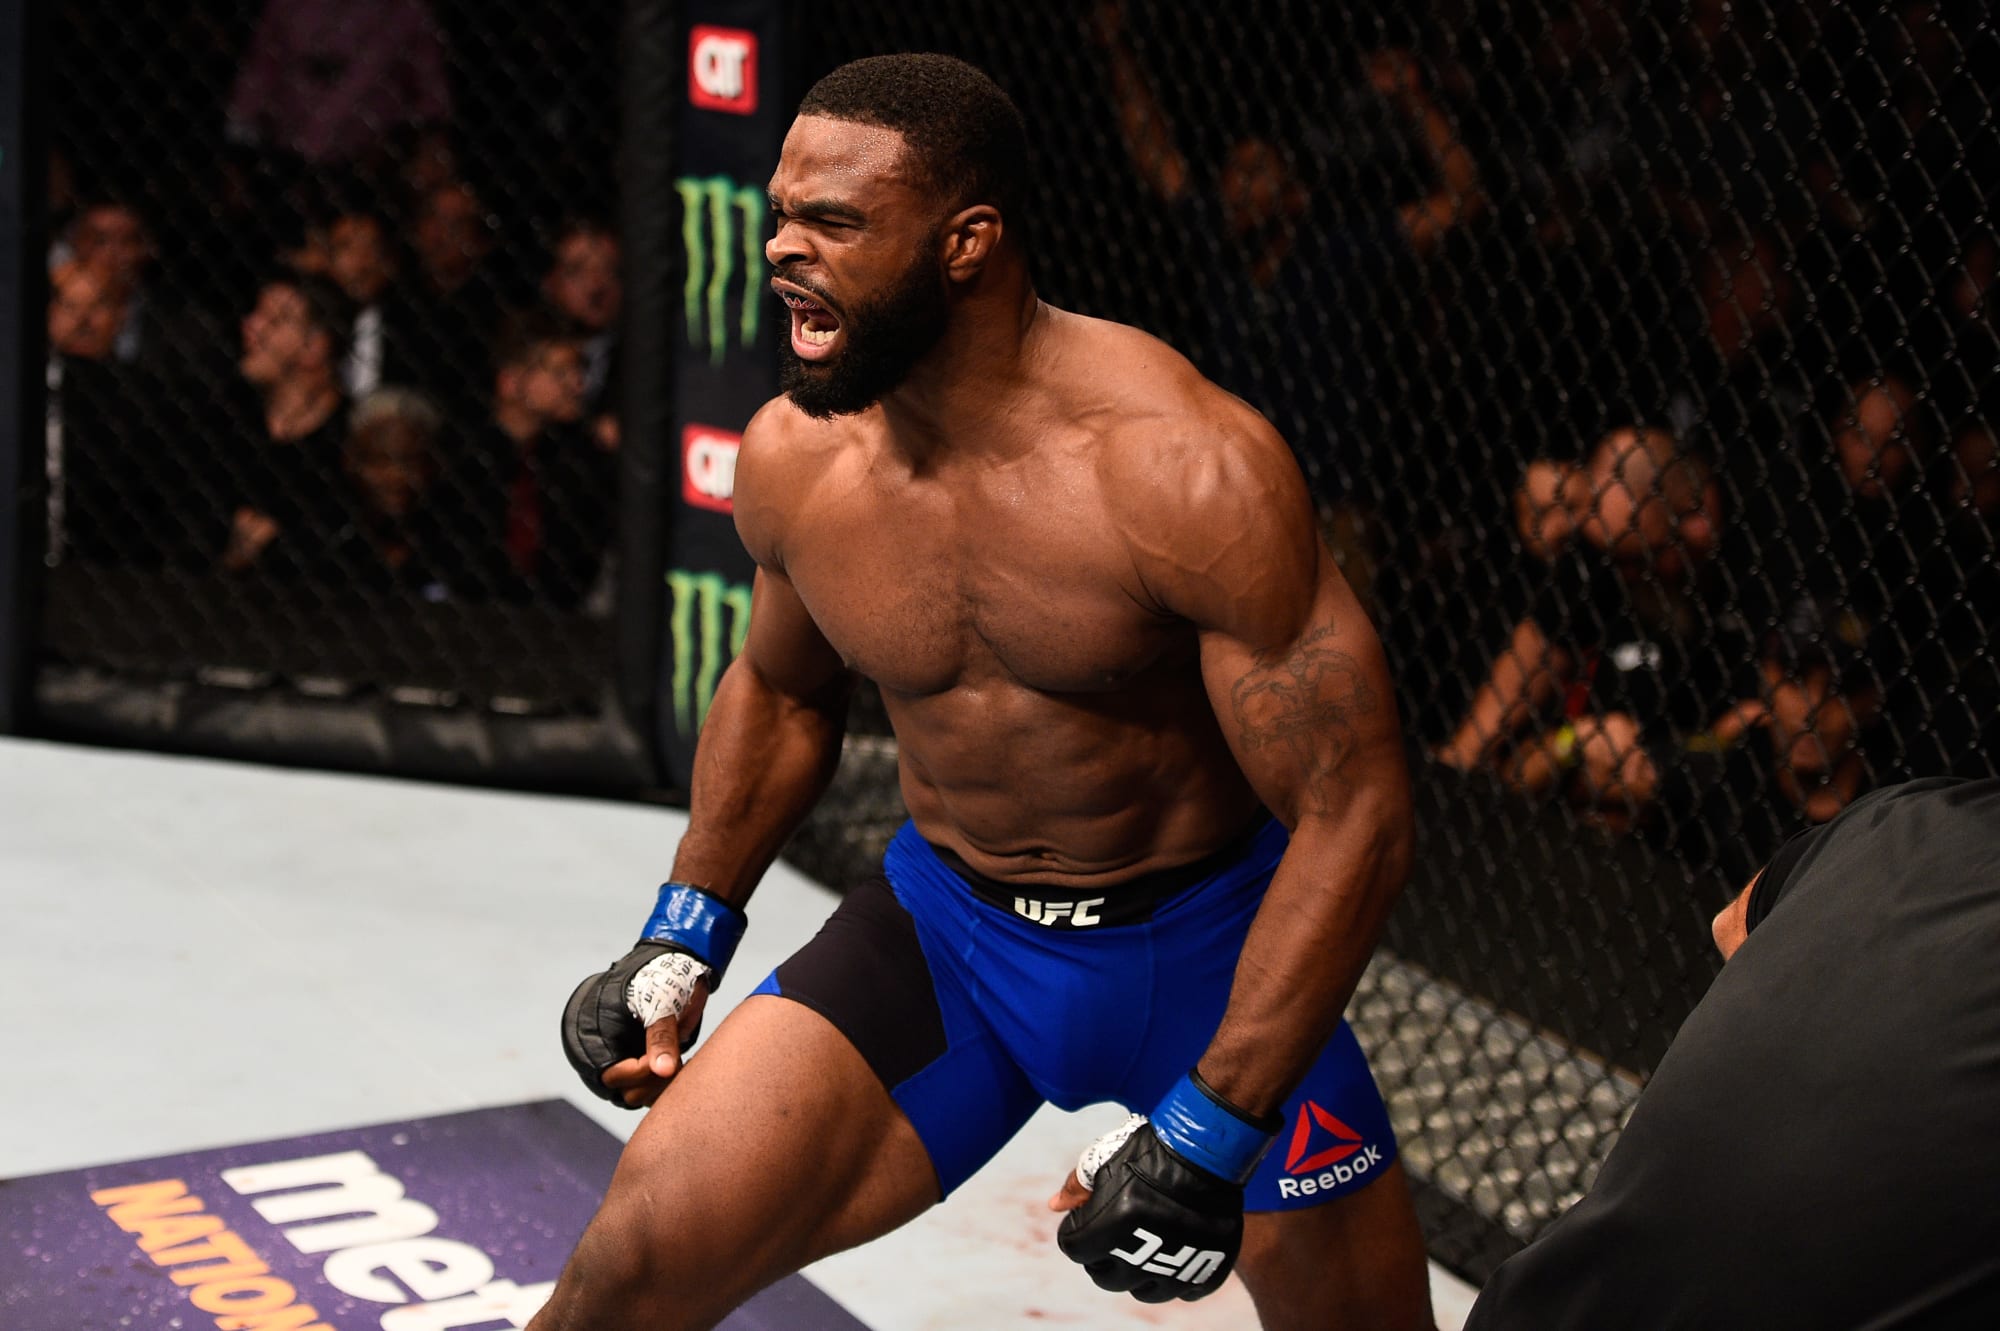 Tyron Woodley: Revisionist History, Favoritism, or ...